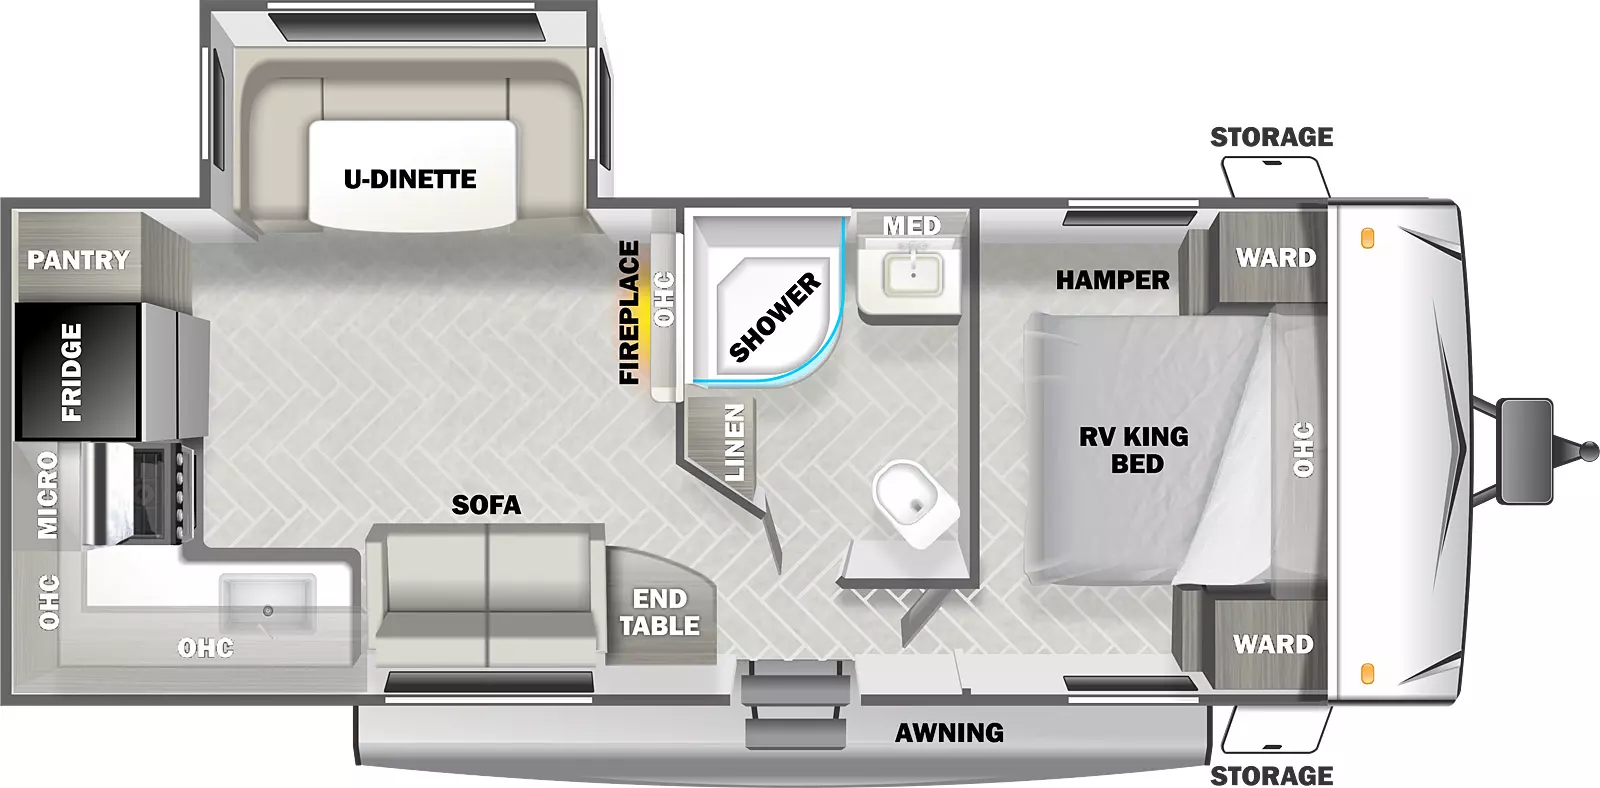 The T2360 has one slideout and one entry. Exterior features front storage, and an awning. Interior layout front to back: RV king bed with overhead cabinet, wardrobes on each side, and off-door side hamper; off-door side full bathroom with medicine cabinet and linen closet; fireplace and overhead cabinet along inner wall; door side entry, end table, and sofa; off-door side slideout with u-dinette; kitchen counter with sink wraps from door side to rear with overhead cabinet, microwave, cooktop, refrigerator and pantry.